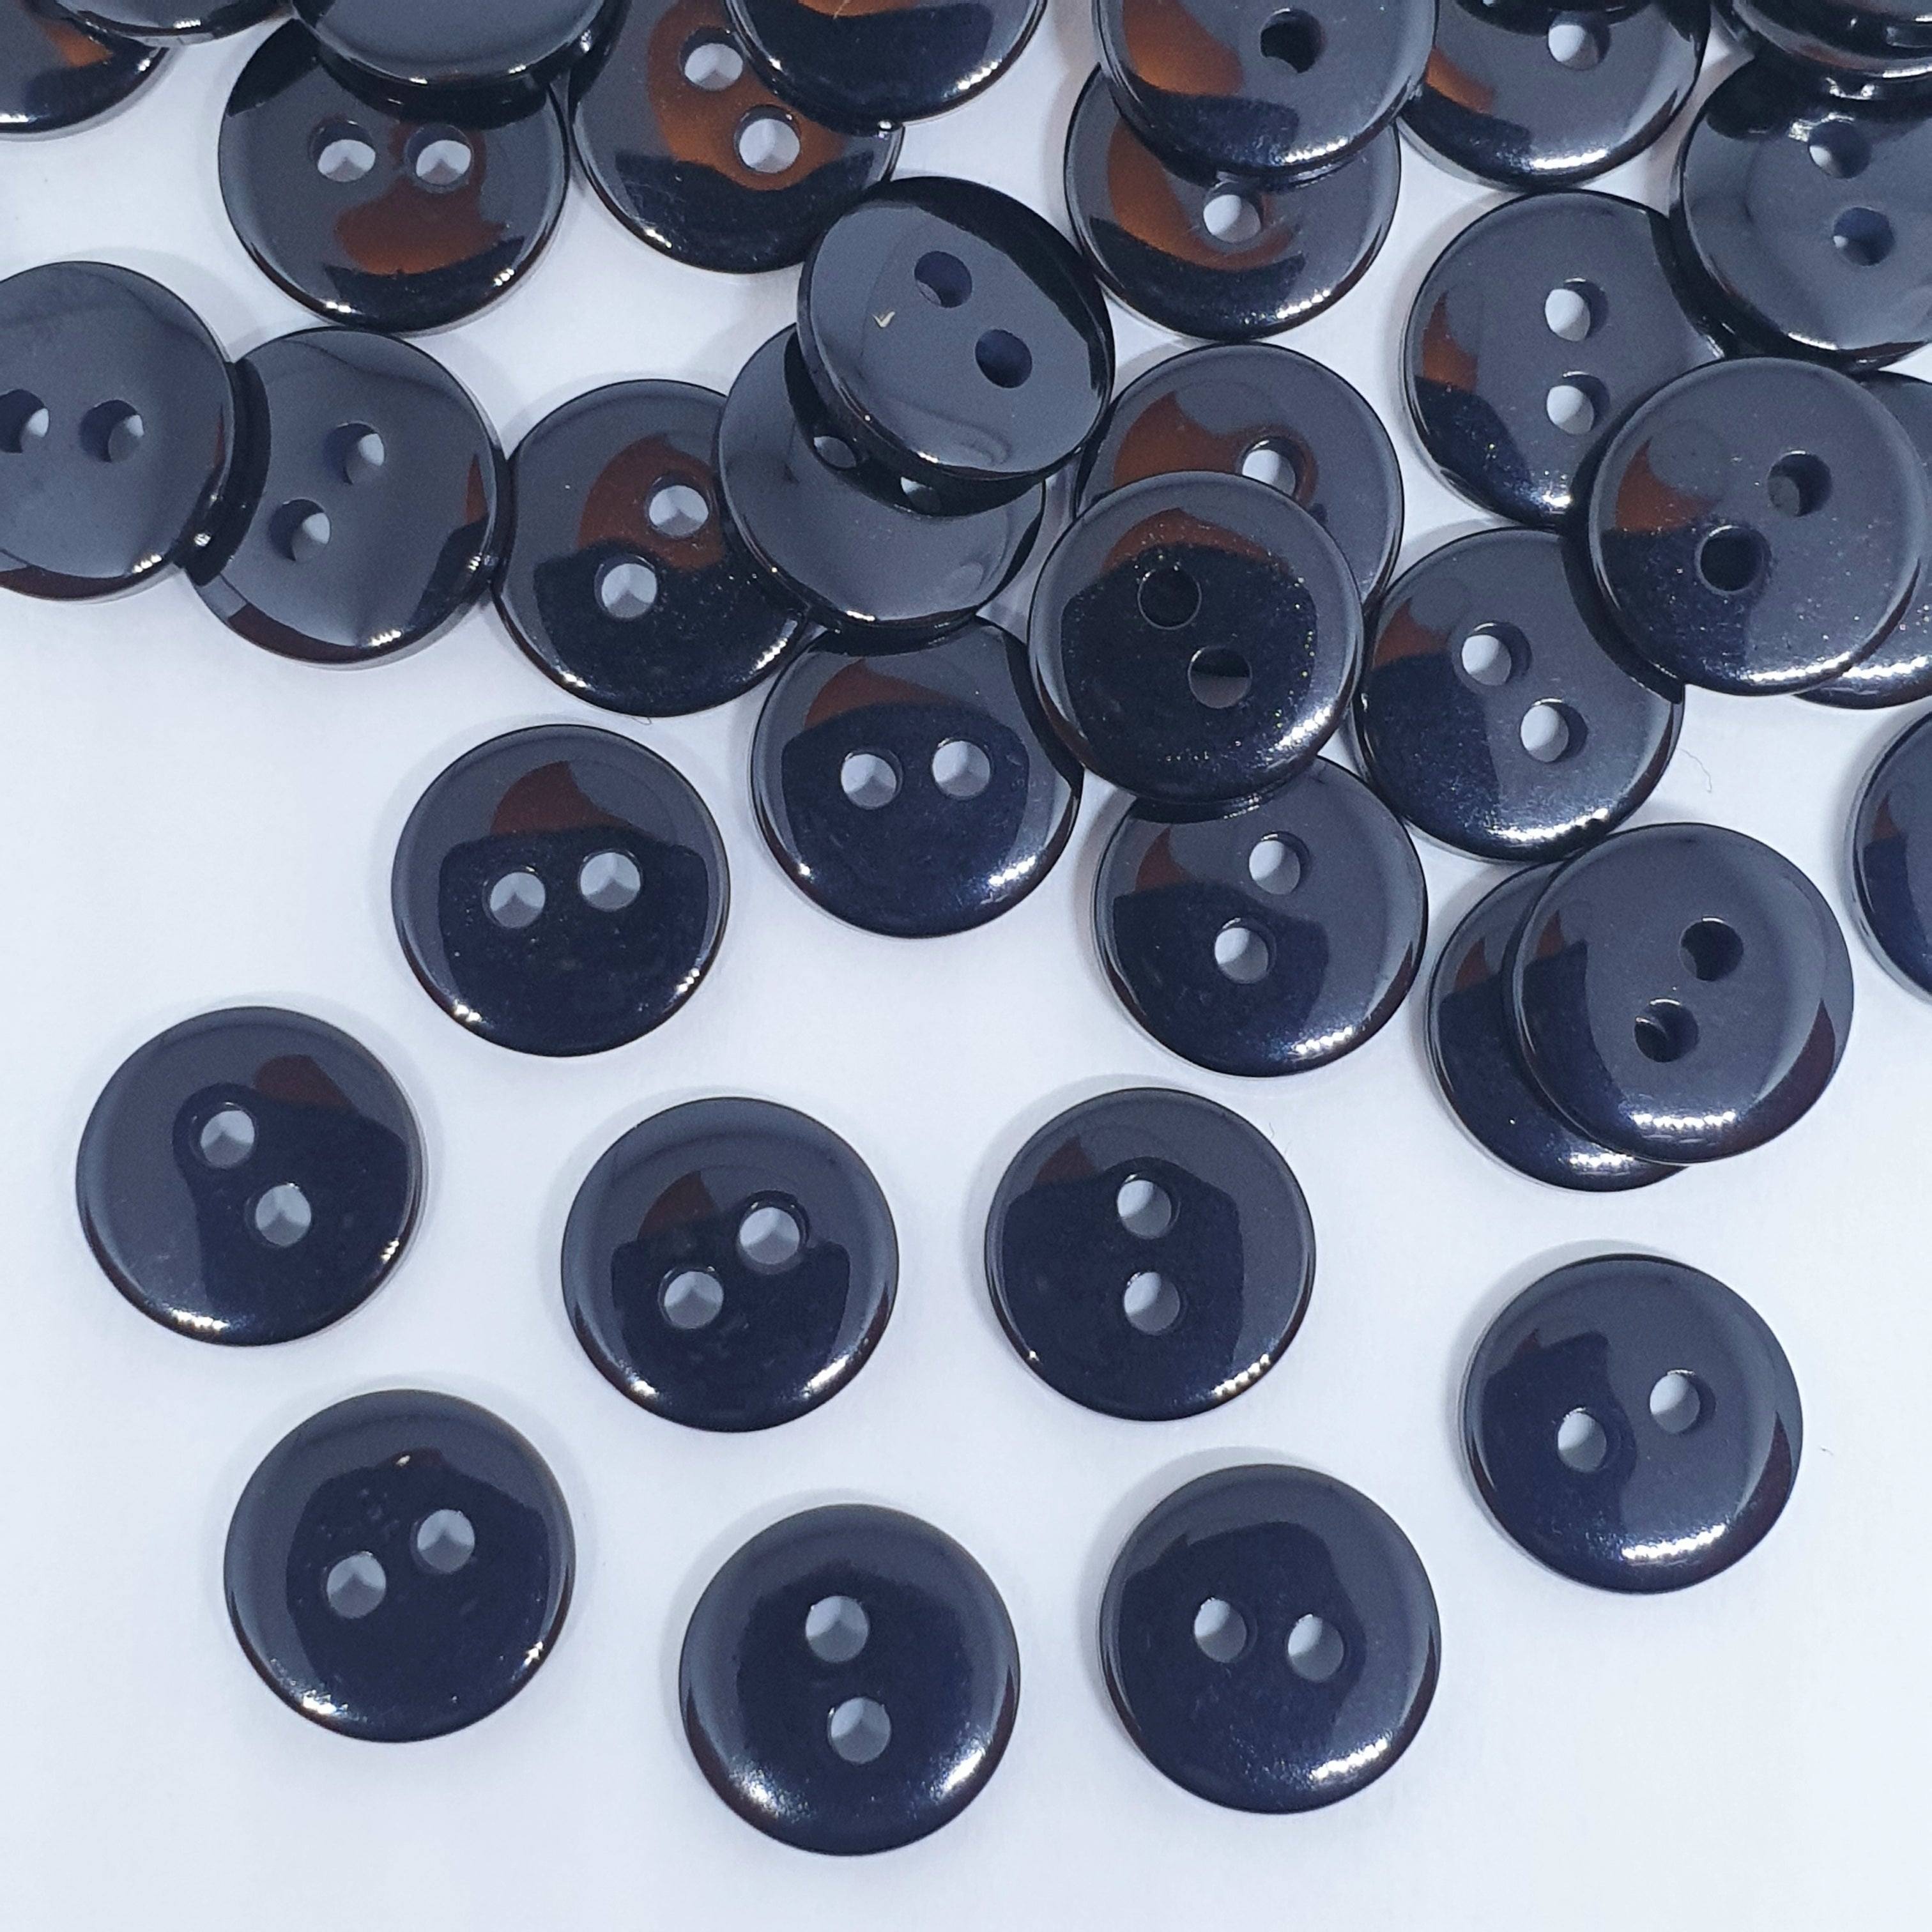 MajorCrafts 120pcs 10mm Black 2 Holes Small Round Resin Sewing Buttons B2